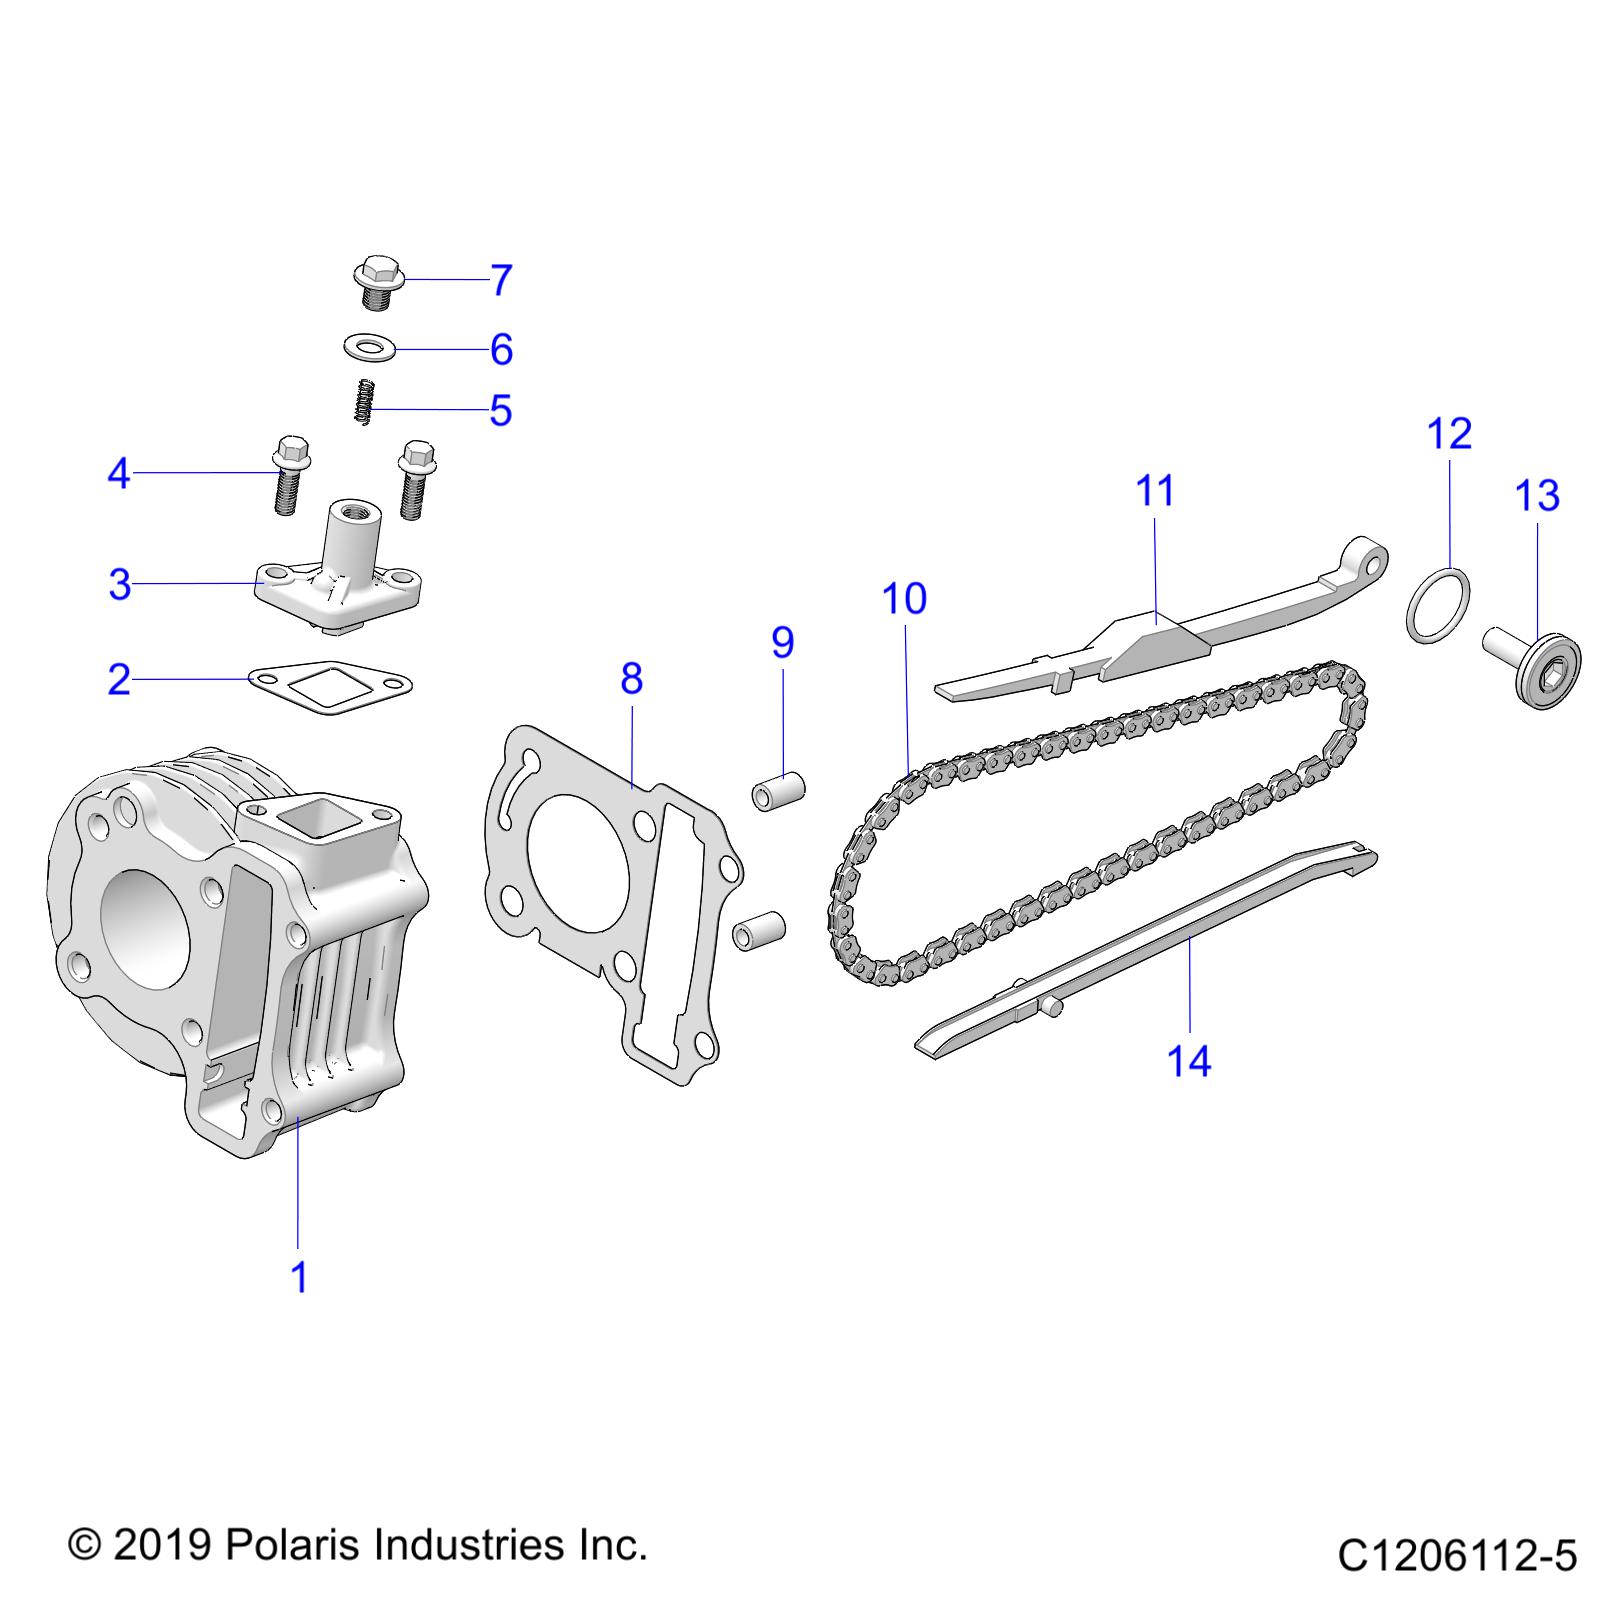 Part Number : 3023859 PLATE TIMING CHAIN TENSION